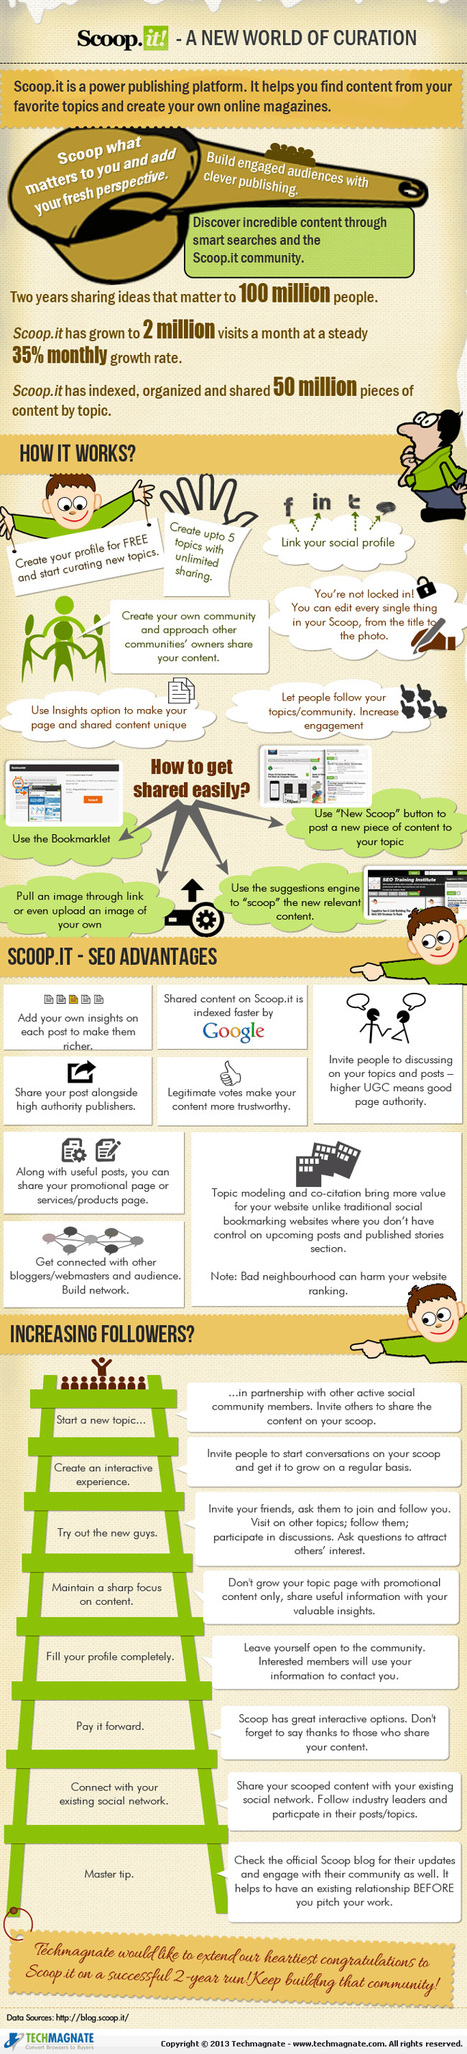 Scoop.It for SEO – A New World of Curation [Infographic] | Distance Learning, mLearning, Digital Education, Technology | Scoop.it